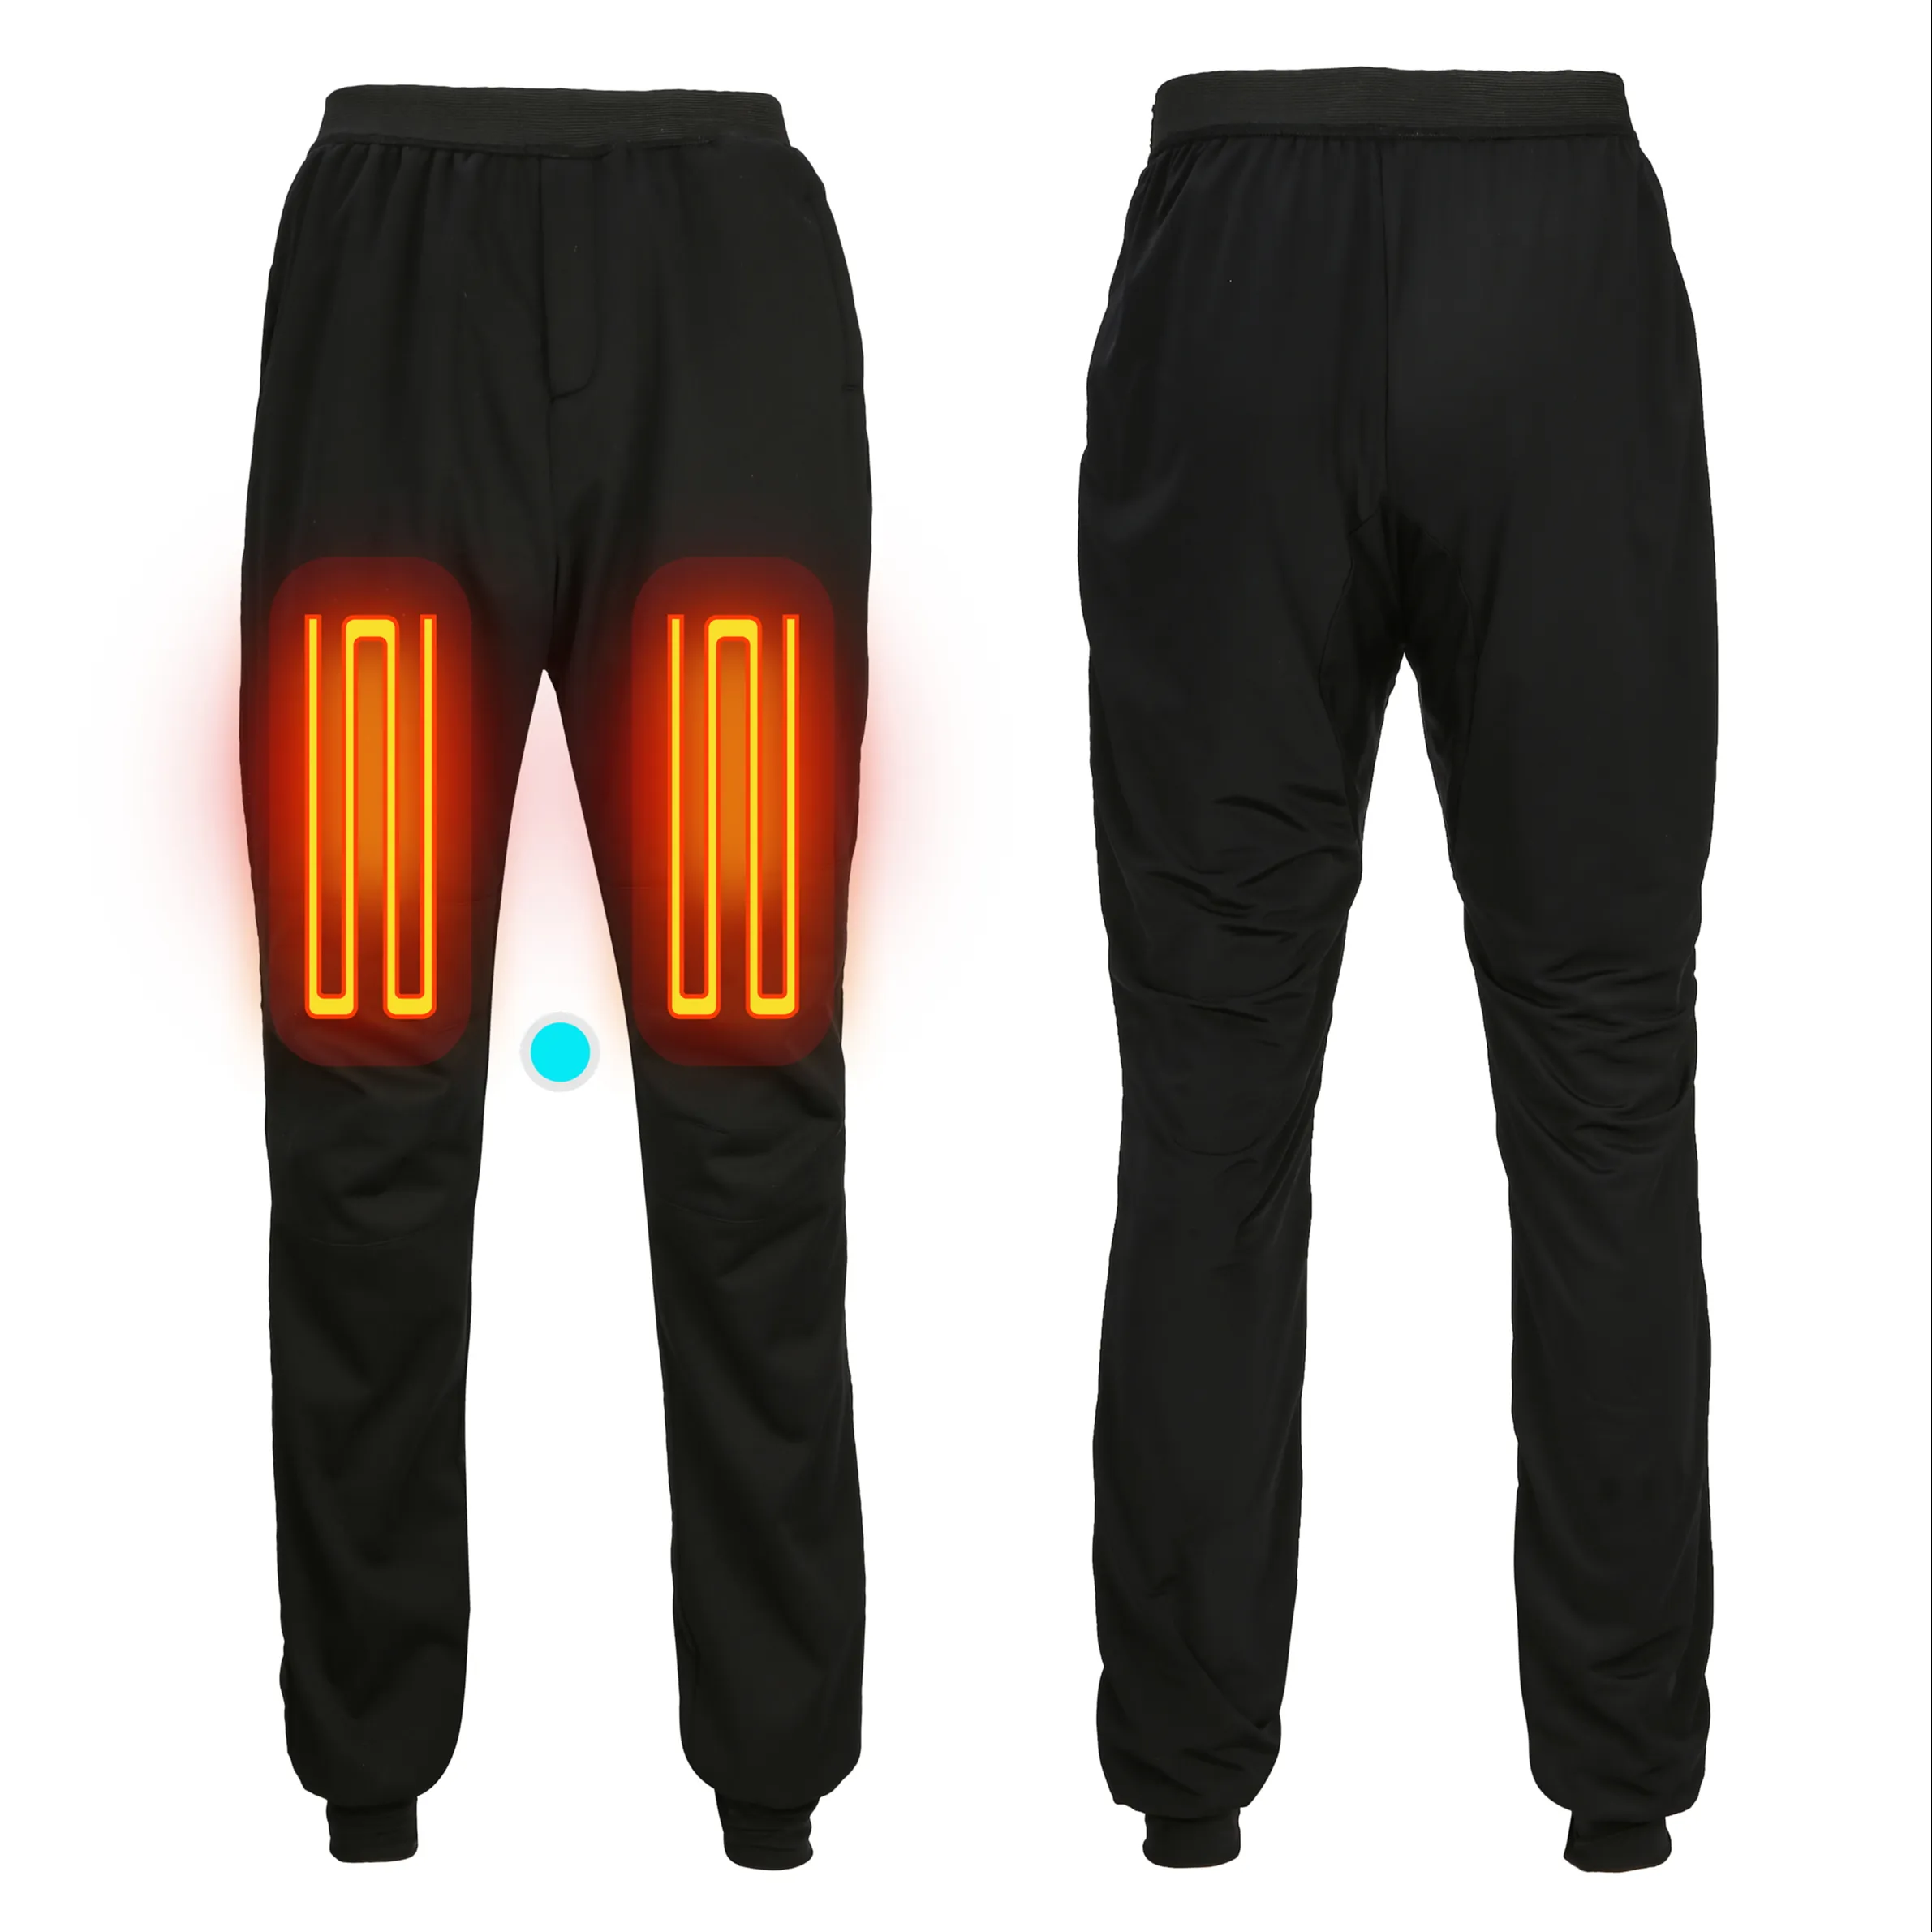 12V Heated Base Layer PantsためMotorcycles Winter Casual OEM Service Plus Size 100% Polyester Breathable Zipper Fly Anti帯電防止